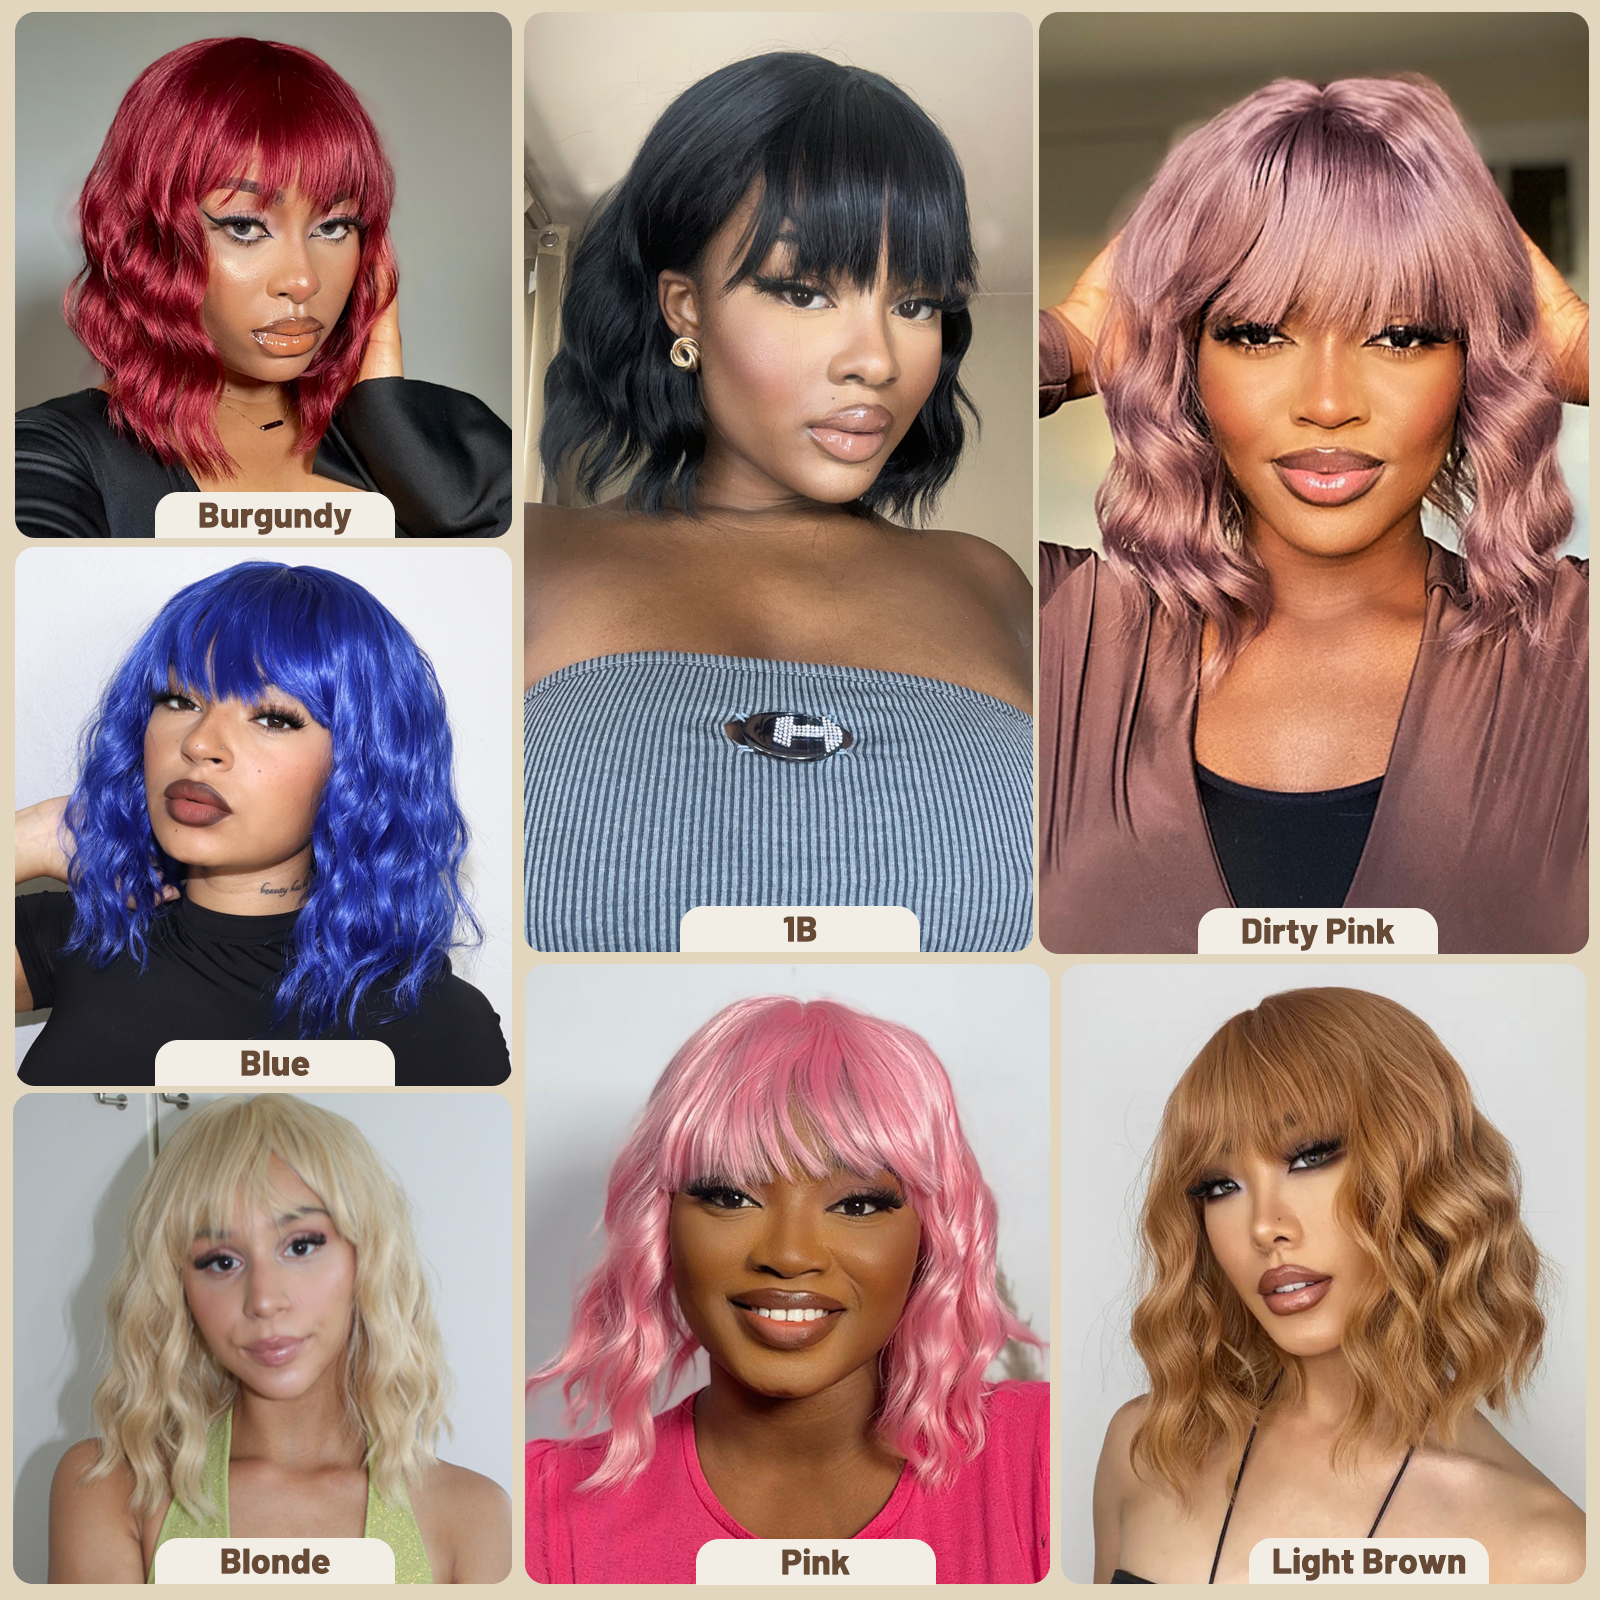 TOYOTRESS Pink Paradise LOOSE WAVY SHORT BOB WIGS HD LACE PART WITH BANGS - 12 INCH NATURAL BLACK BOB HAIR WIGS FOR BLACK WOMEN, SHOULDER LENGTH CURLY SYNTHETIC WIGS (LF0926)